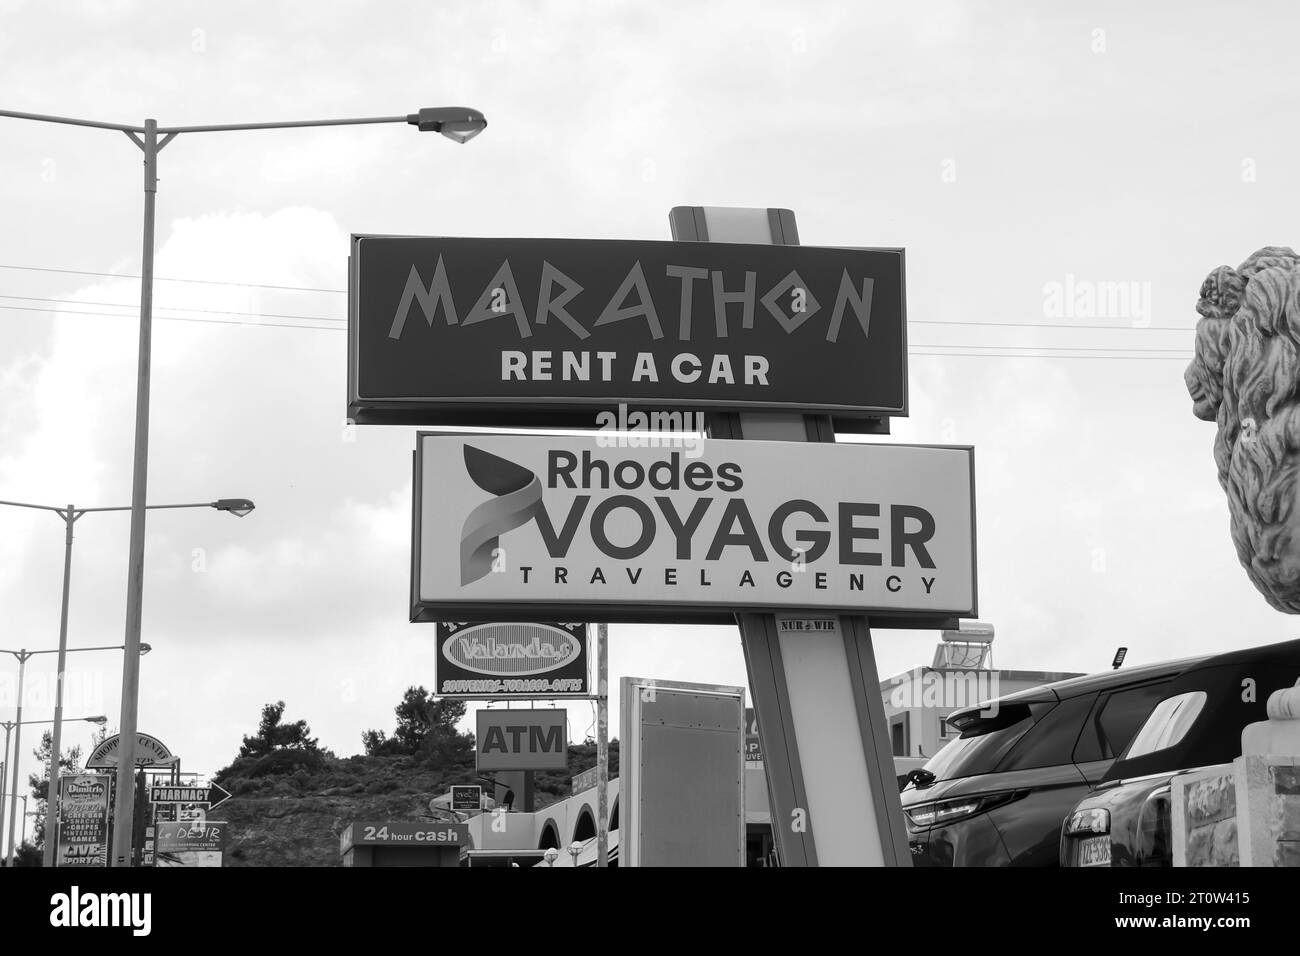 Marathon Rent a Car business and Rhodes Voyager travel agency office sign informing tourist people of store location in black and white Stock Photo